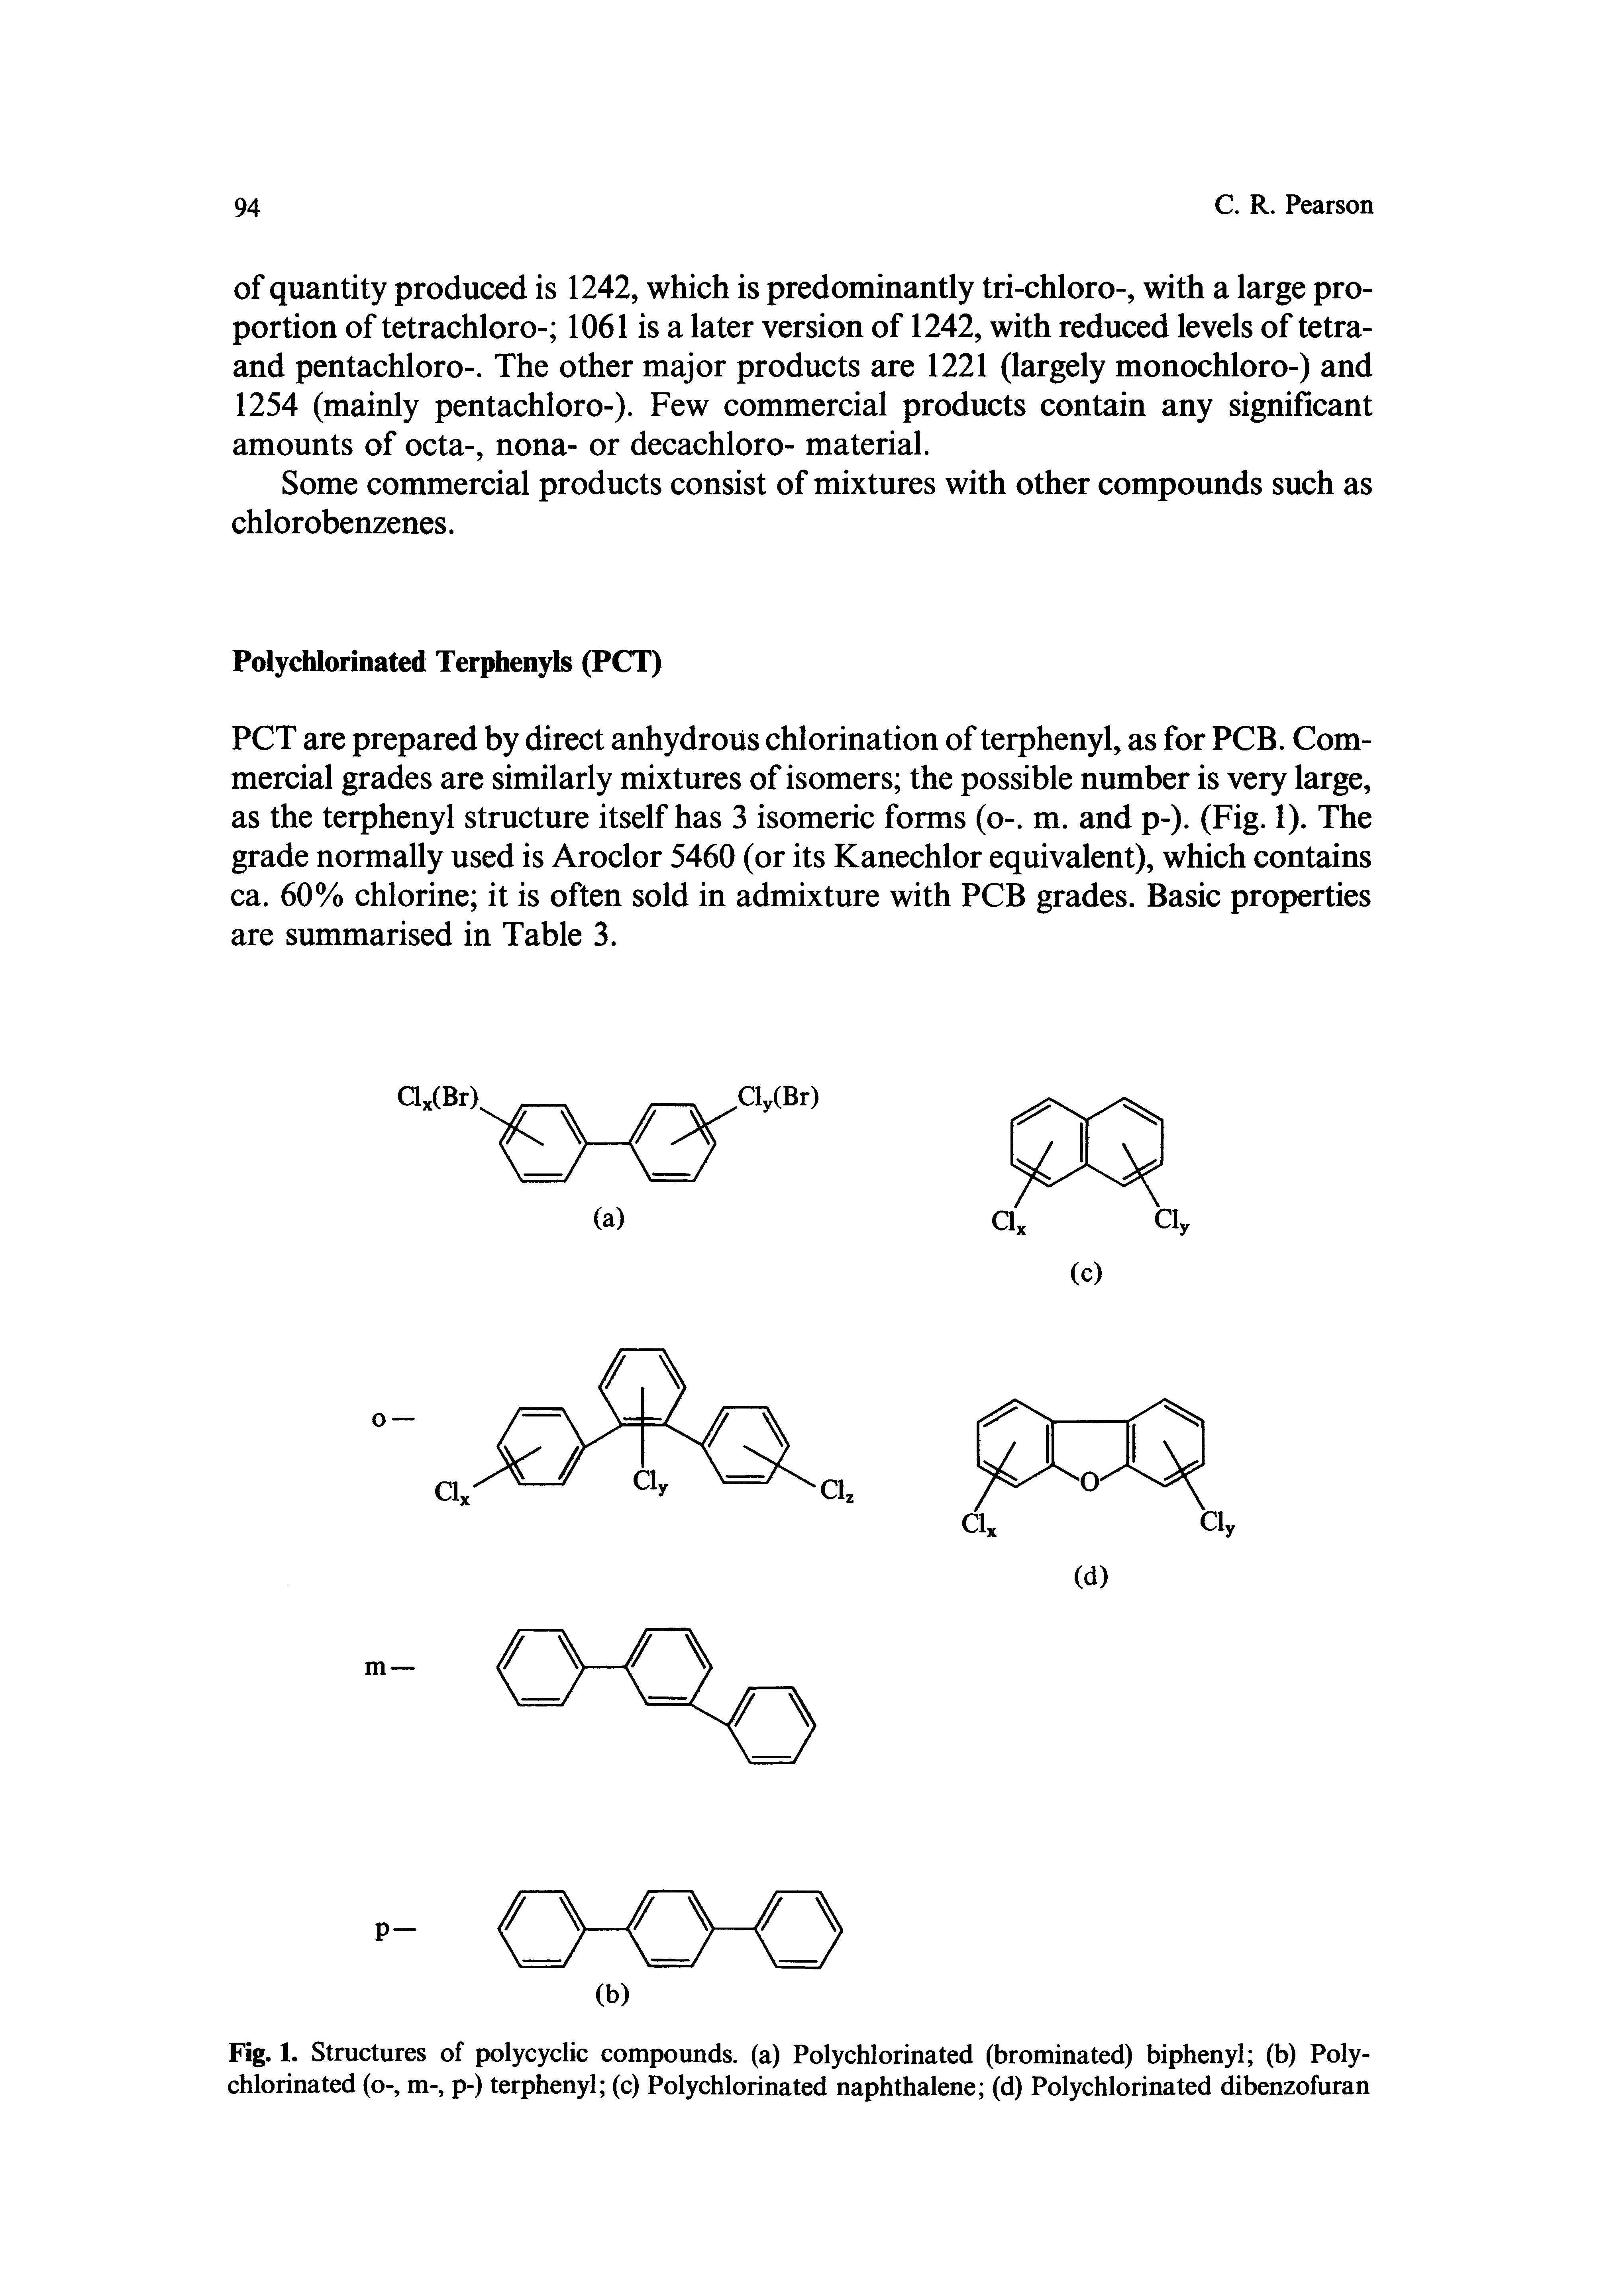 Fig. 1. Structures of polycyclic compounds, (a) Polychlorinated (brominated) biphenyl (b) Polychlorinated (o-, m-, p-) terphenyl (c) Polychlorinated naphthalene (d) Polychlorinated dibenzofuran...